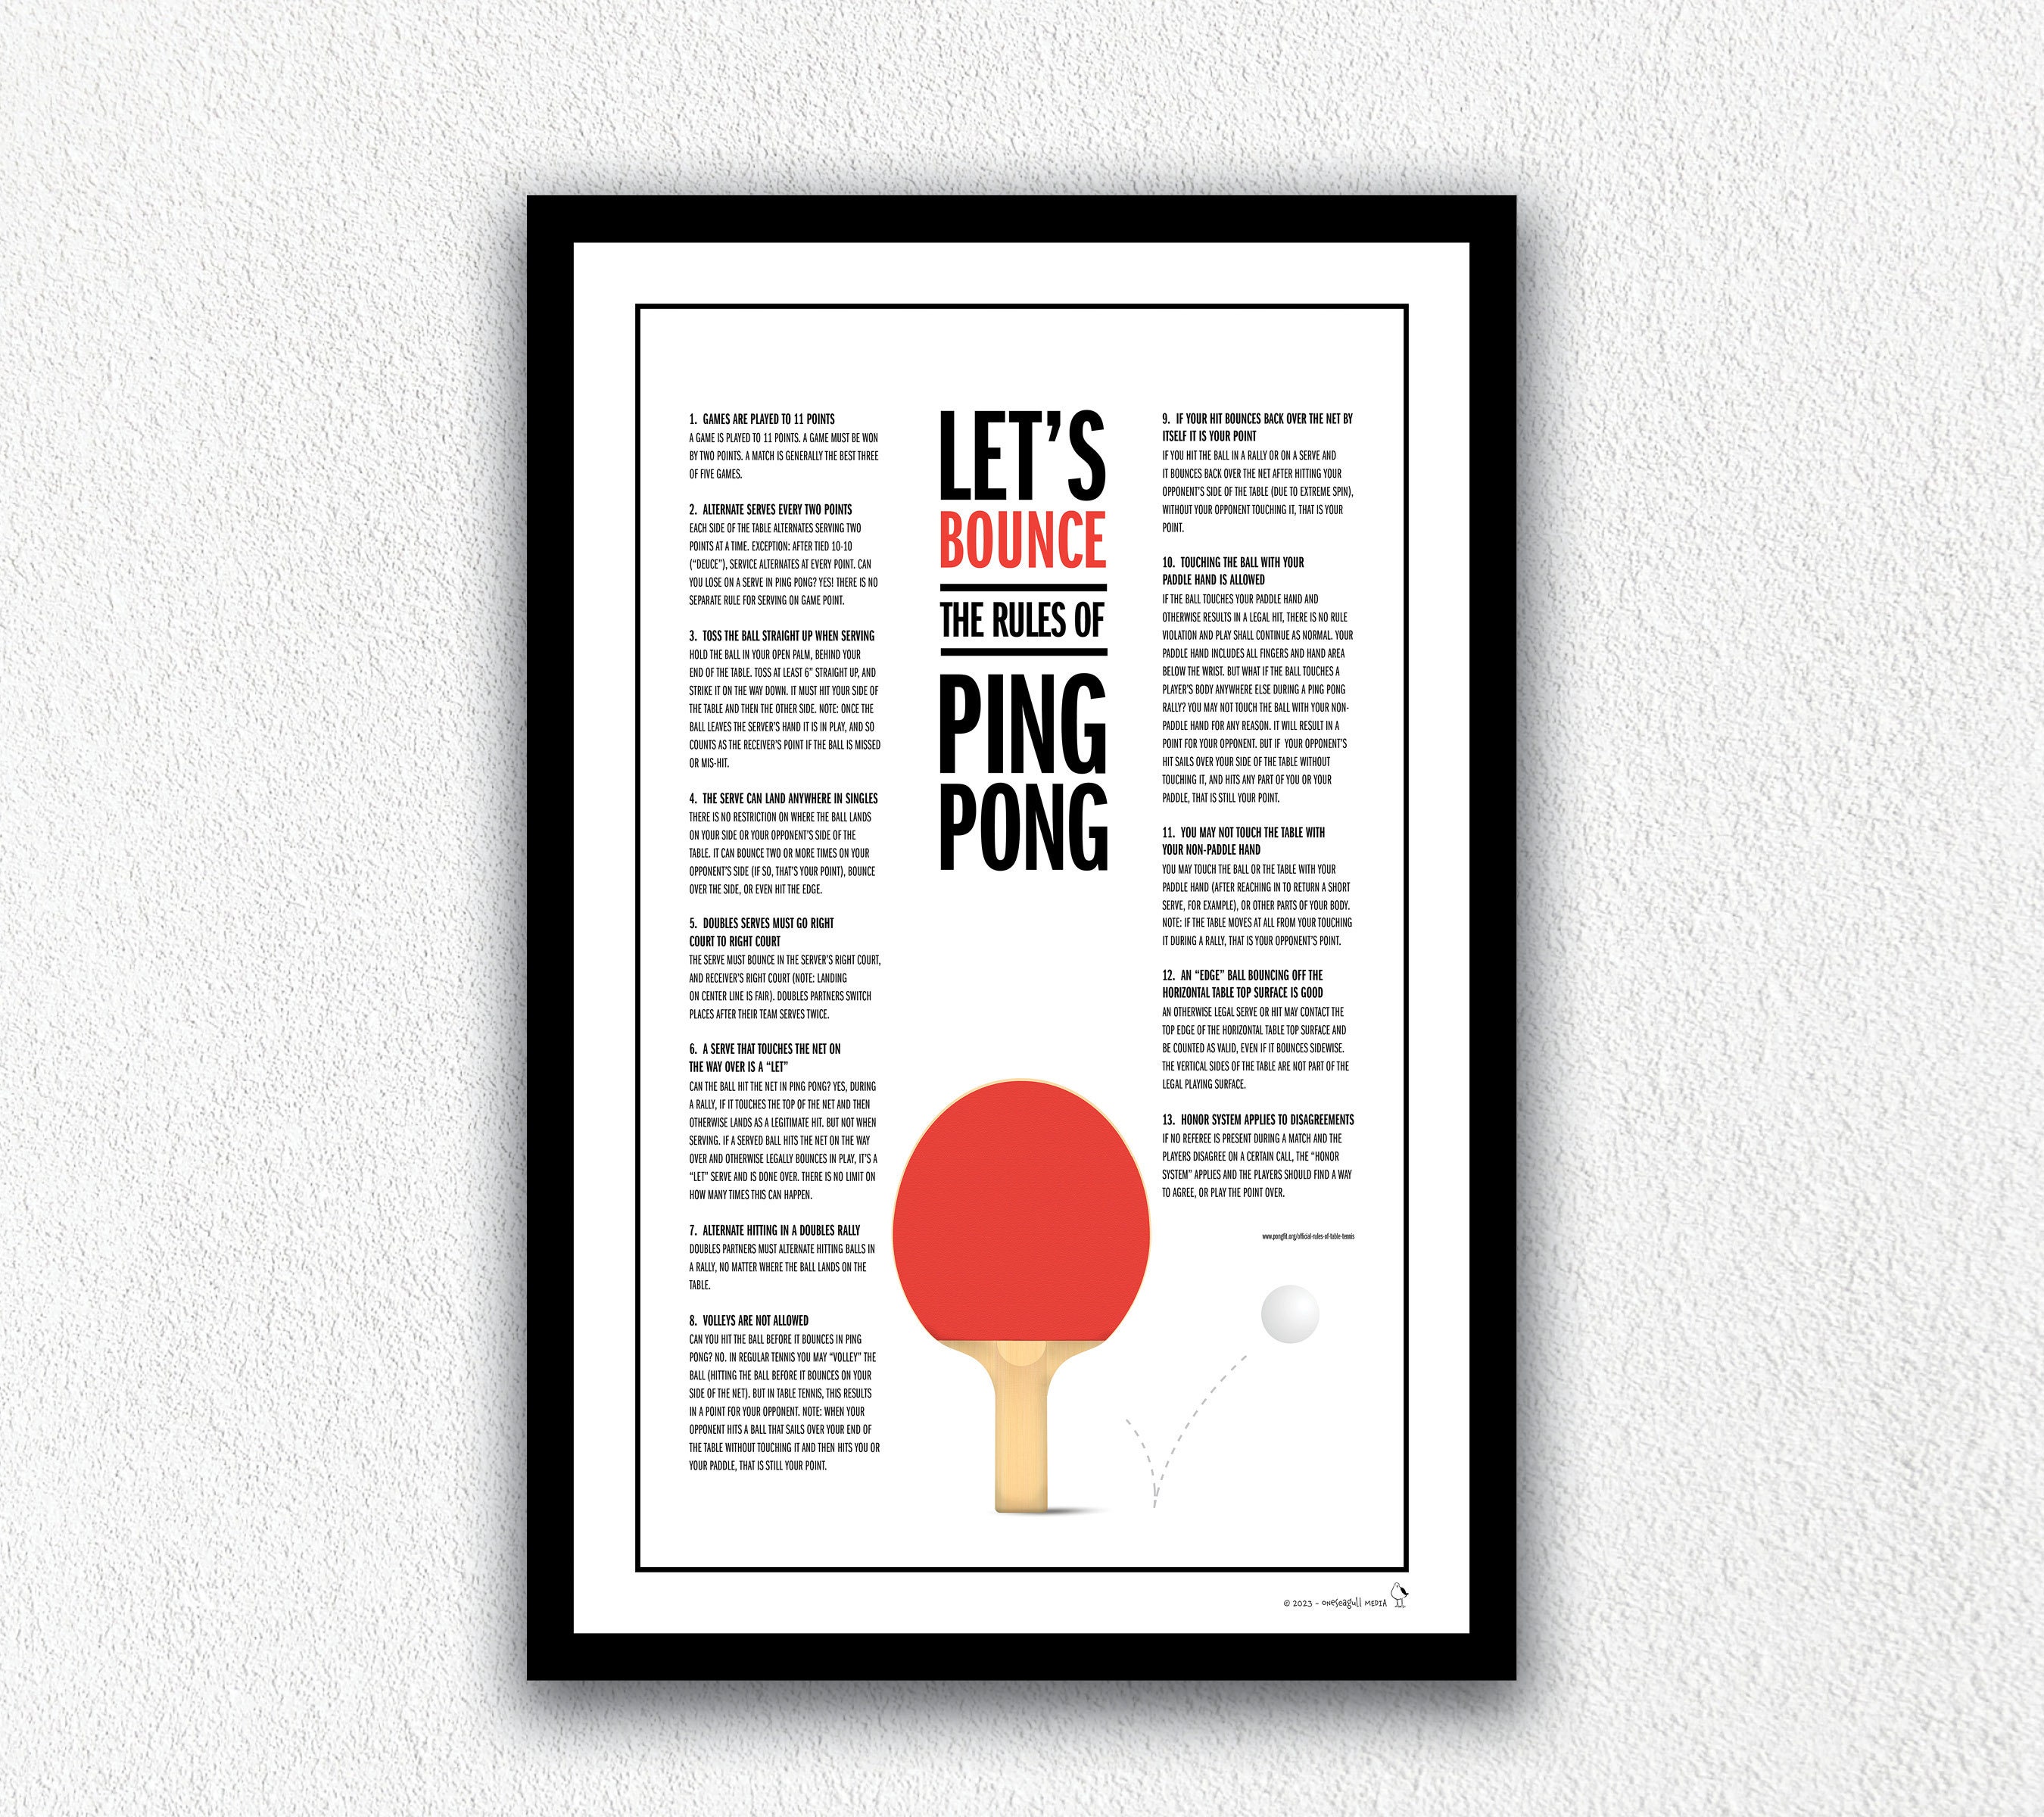 11 Inventions ideas  inventions, table tennis, ping pong